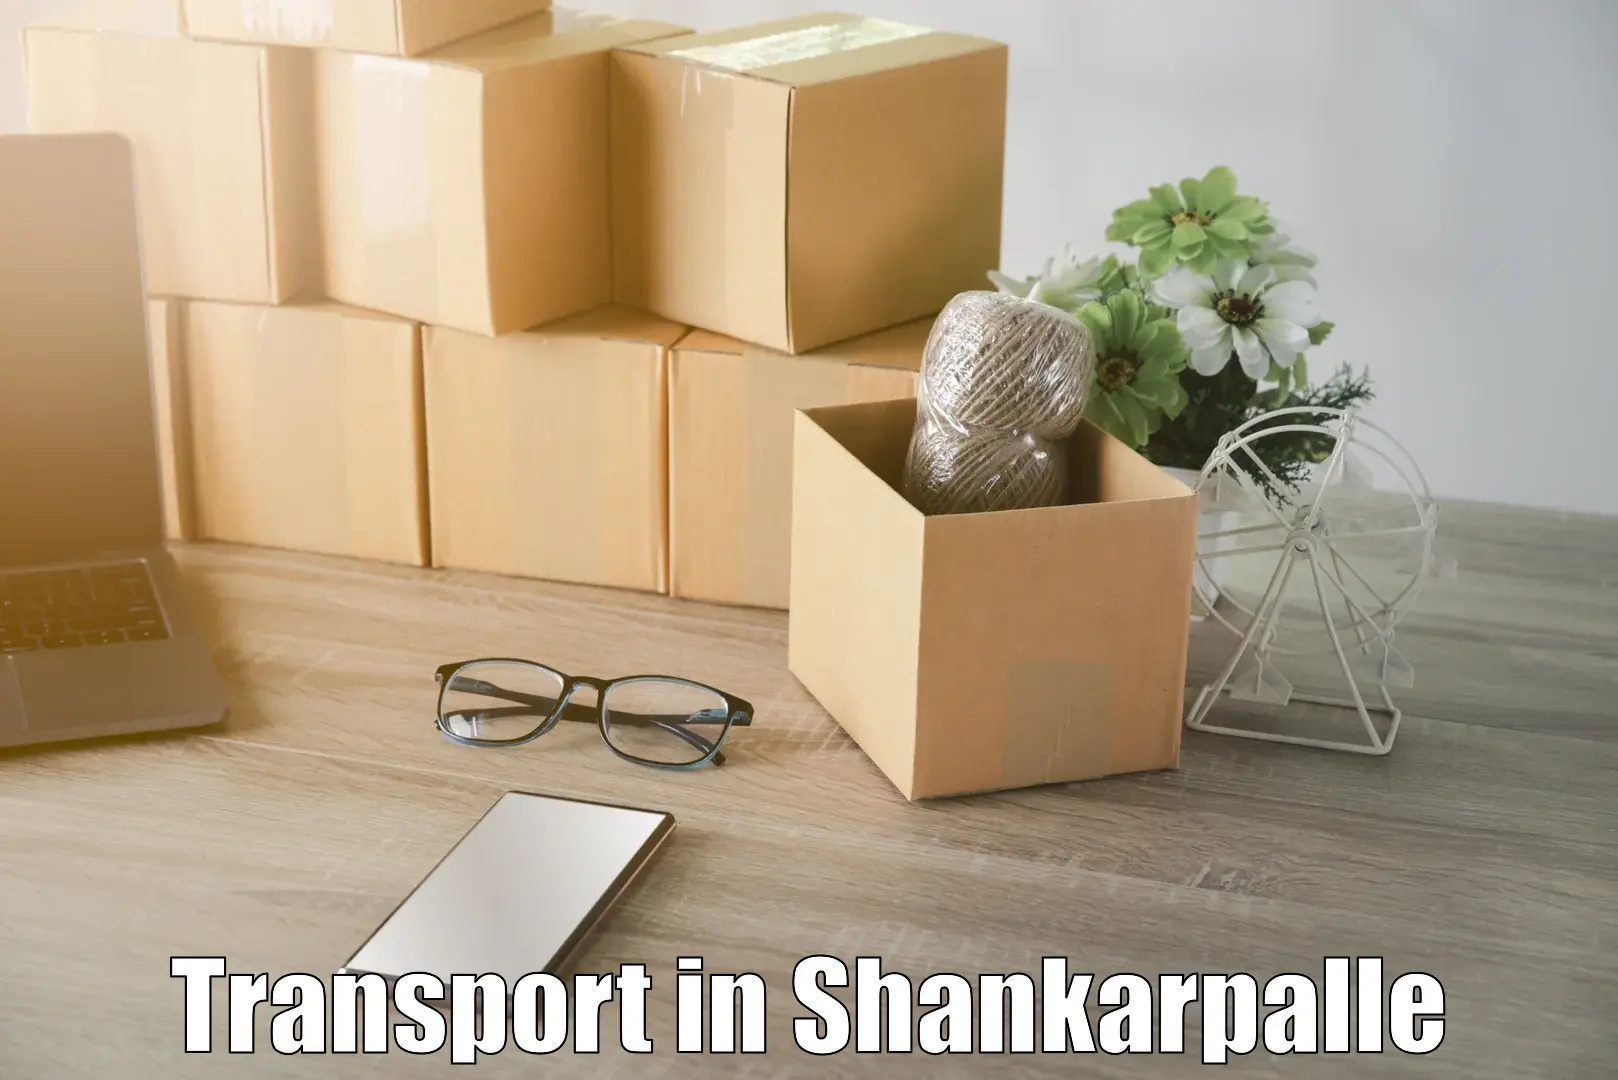 Road transport services in Shankarpalle